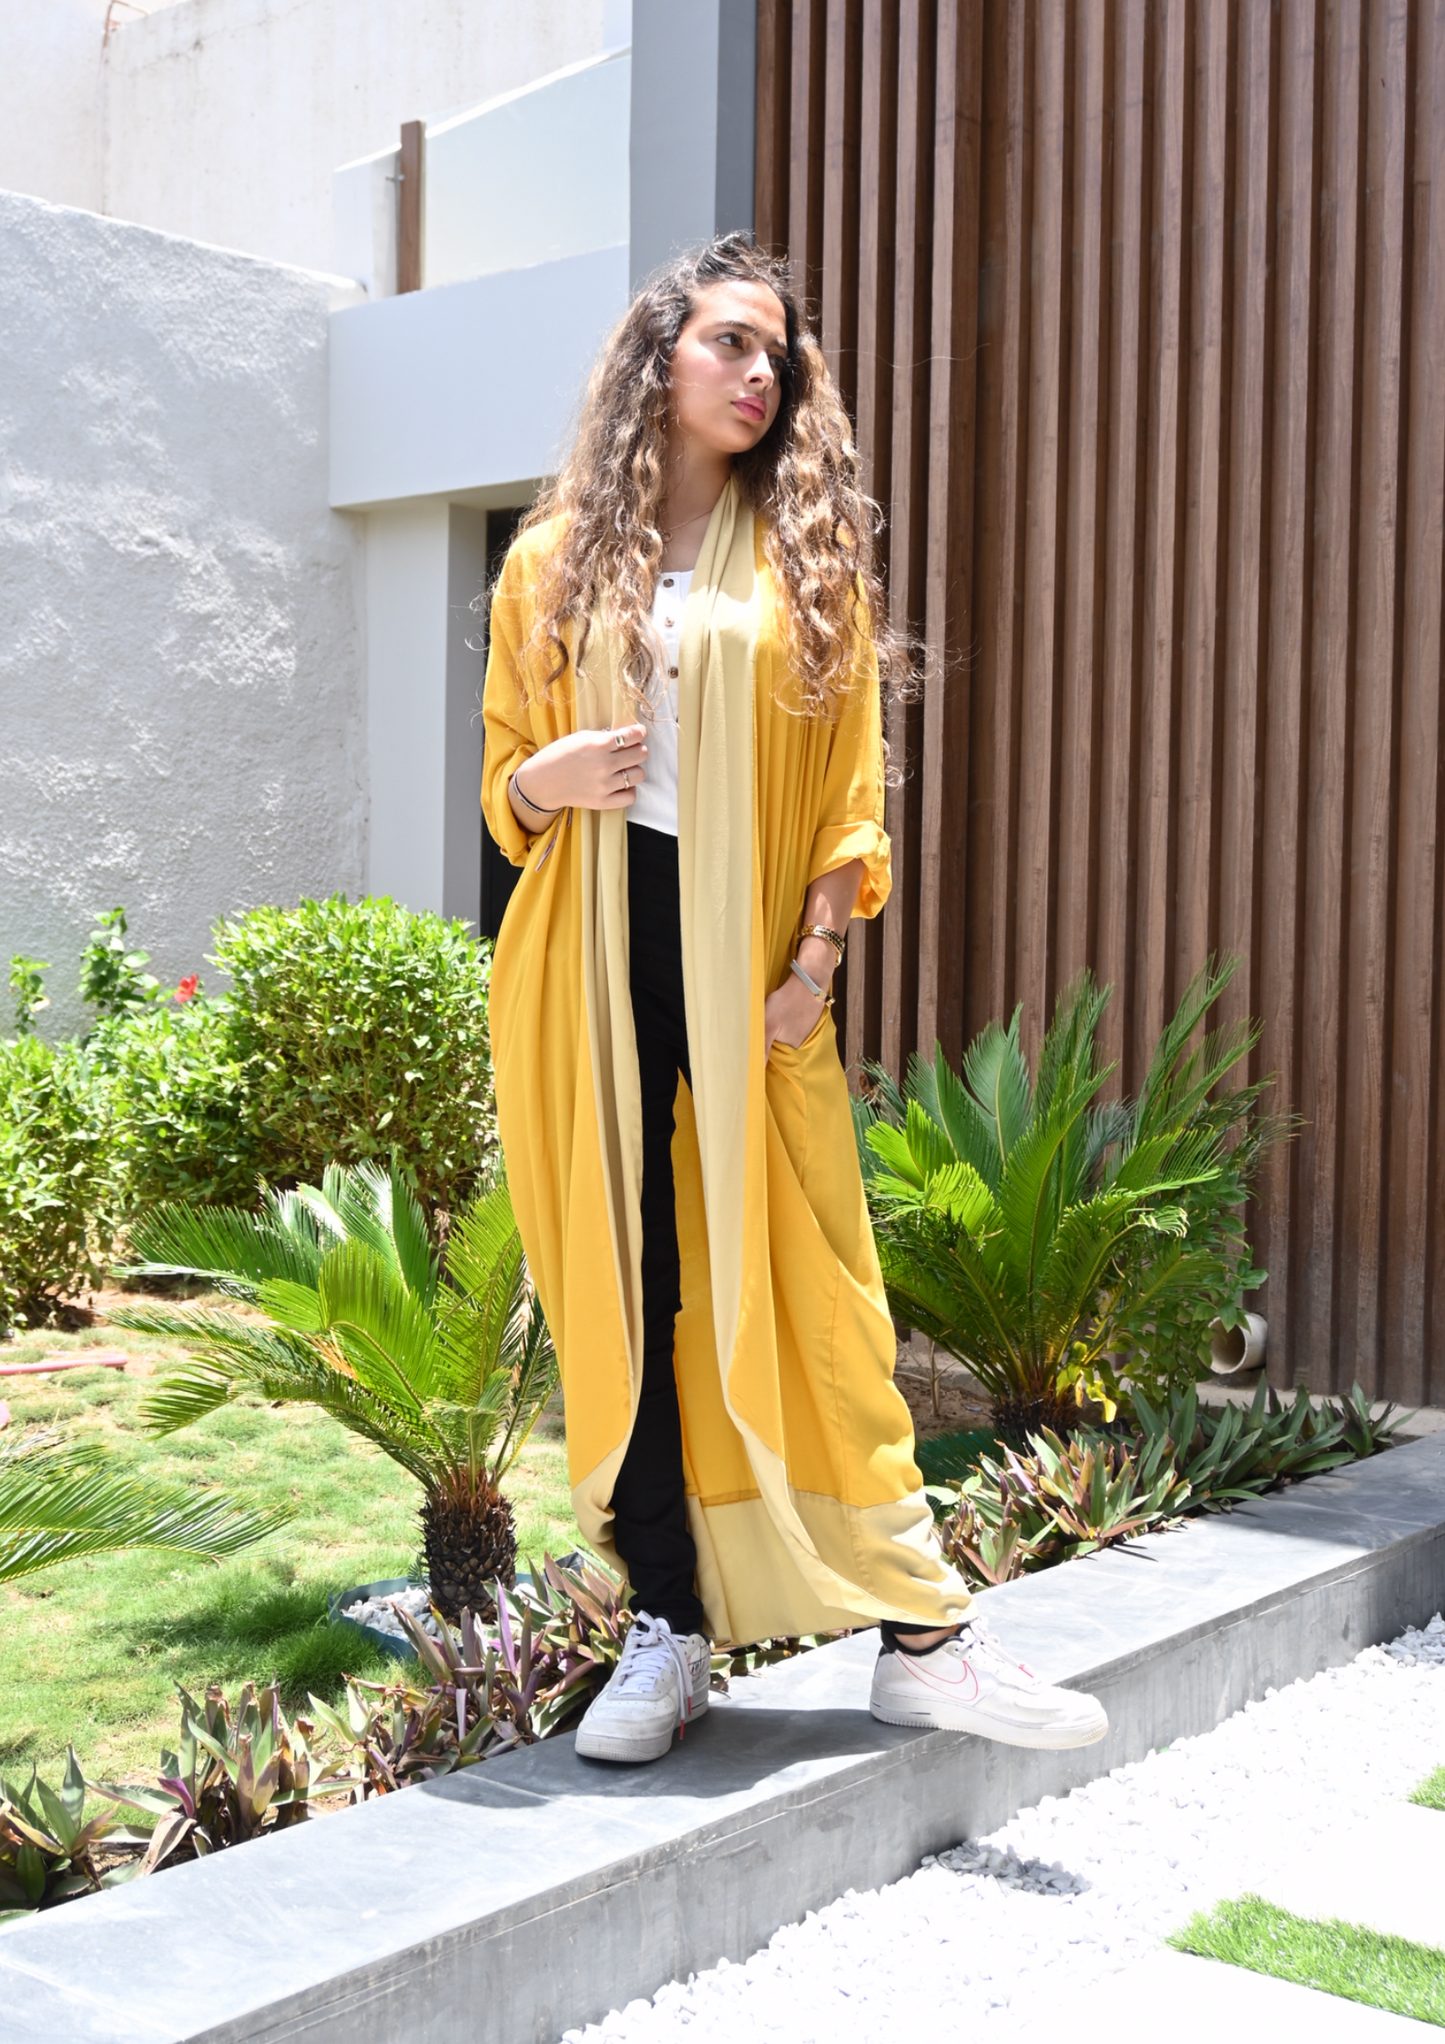 The Summertime Abaya Hijab - Lightweight for hot days - The Untitled Project